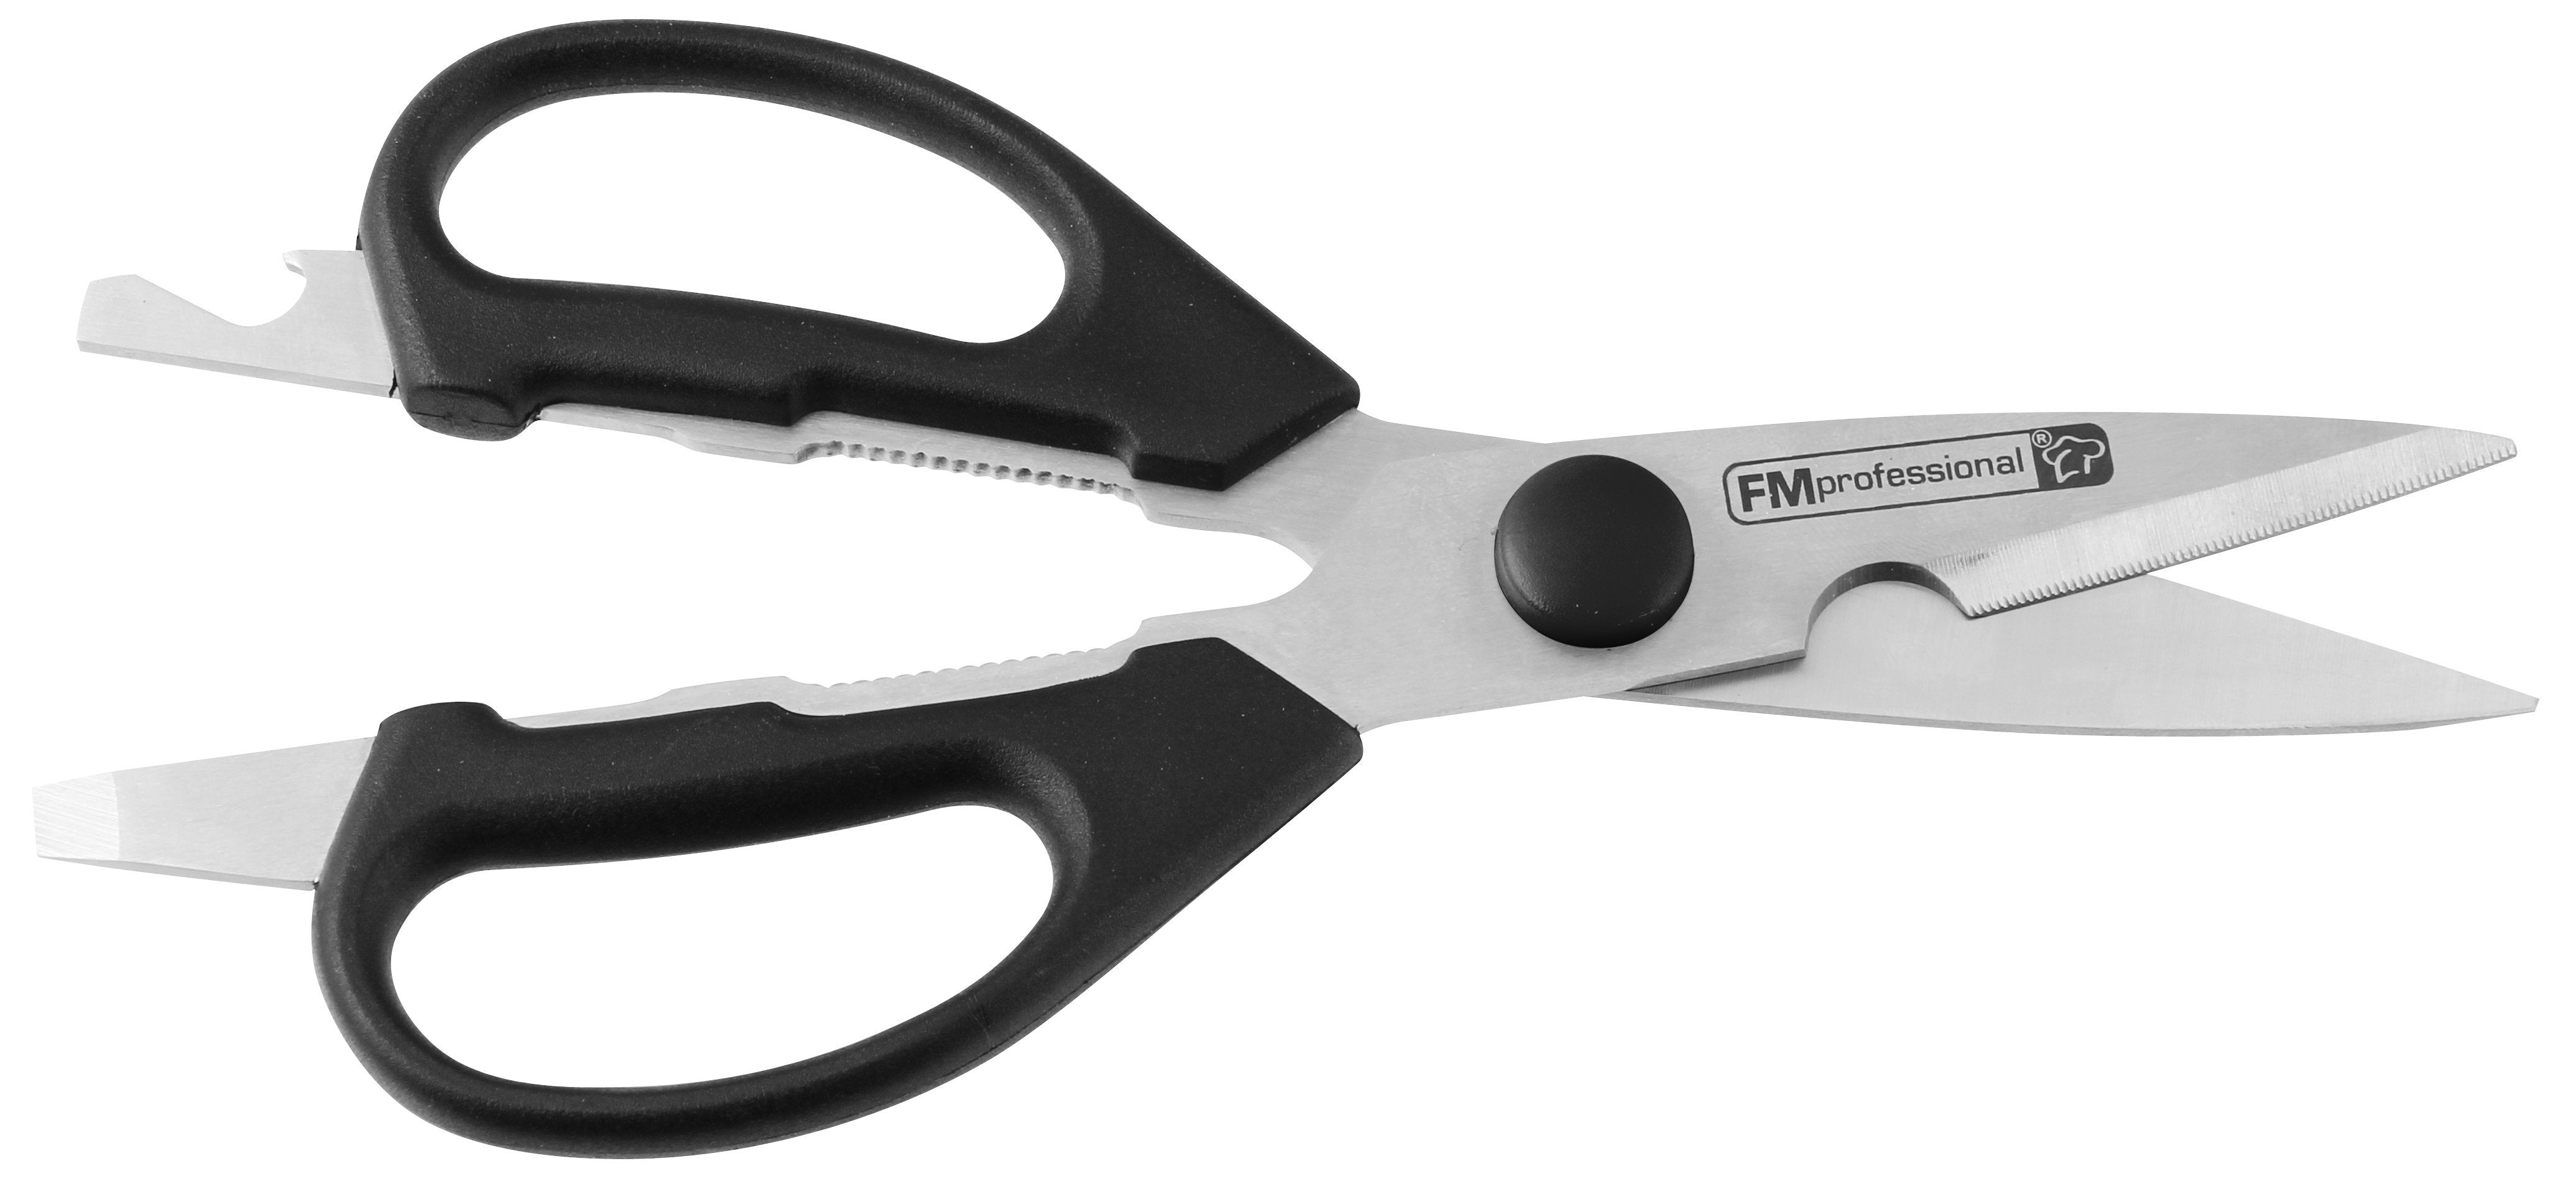 FMprofessional Universal Scissors With Cap Lifter And Bottle And Glass Opener